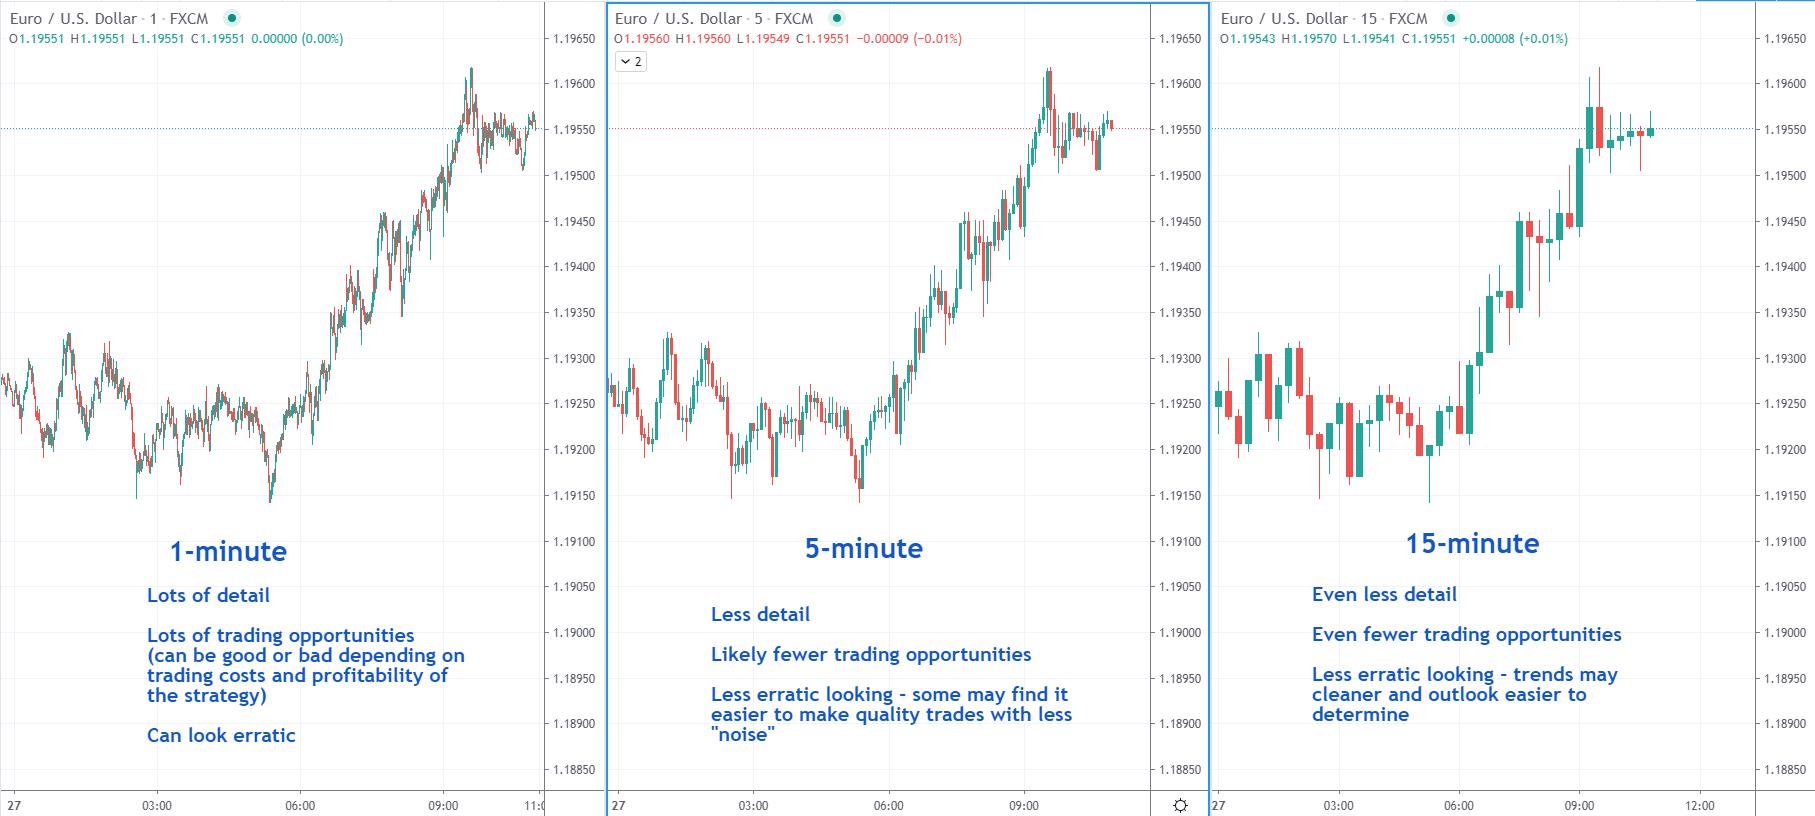 1 minute daily forex trading strategy reviews on module 4 investing assessment 4-2 answer key